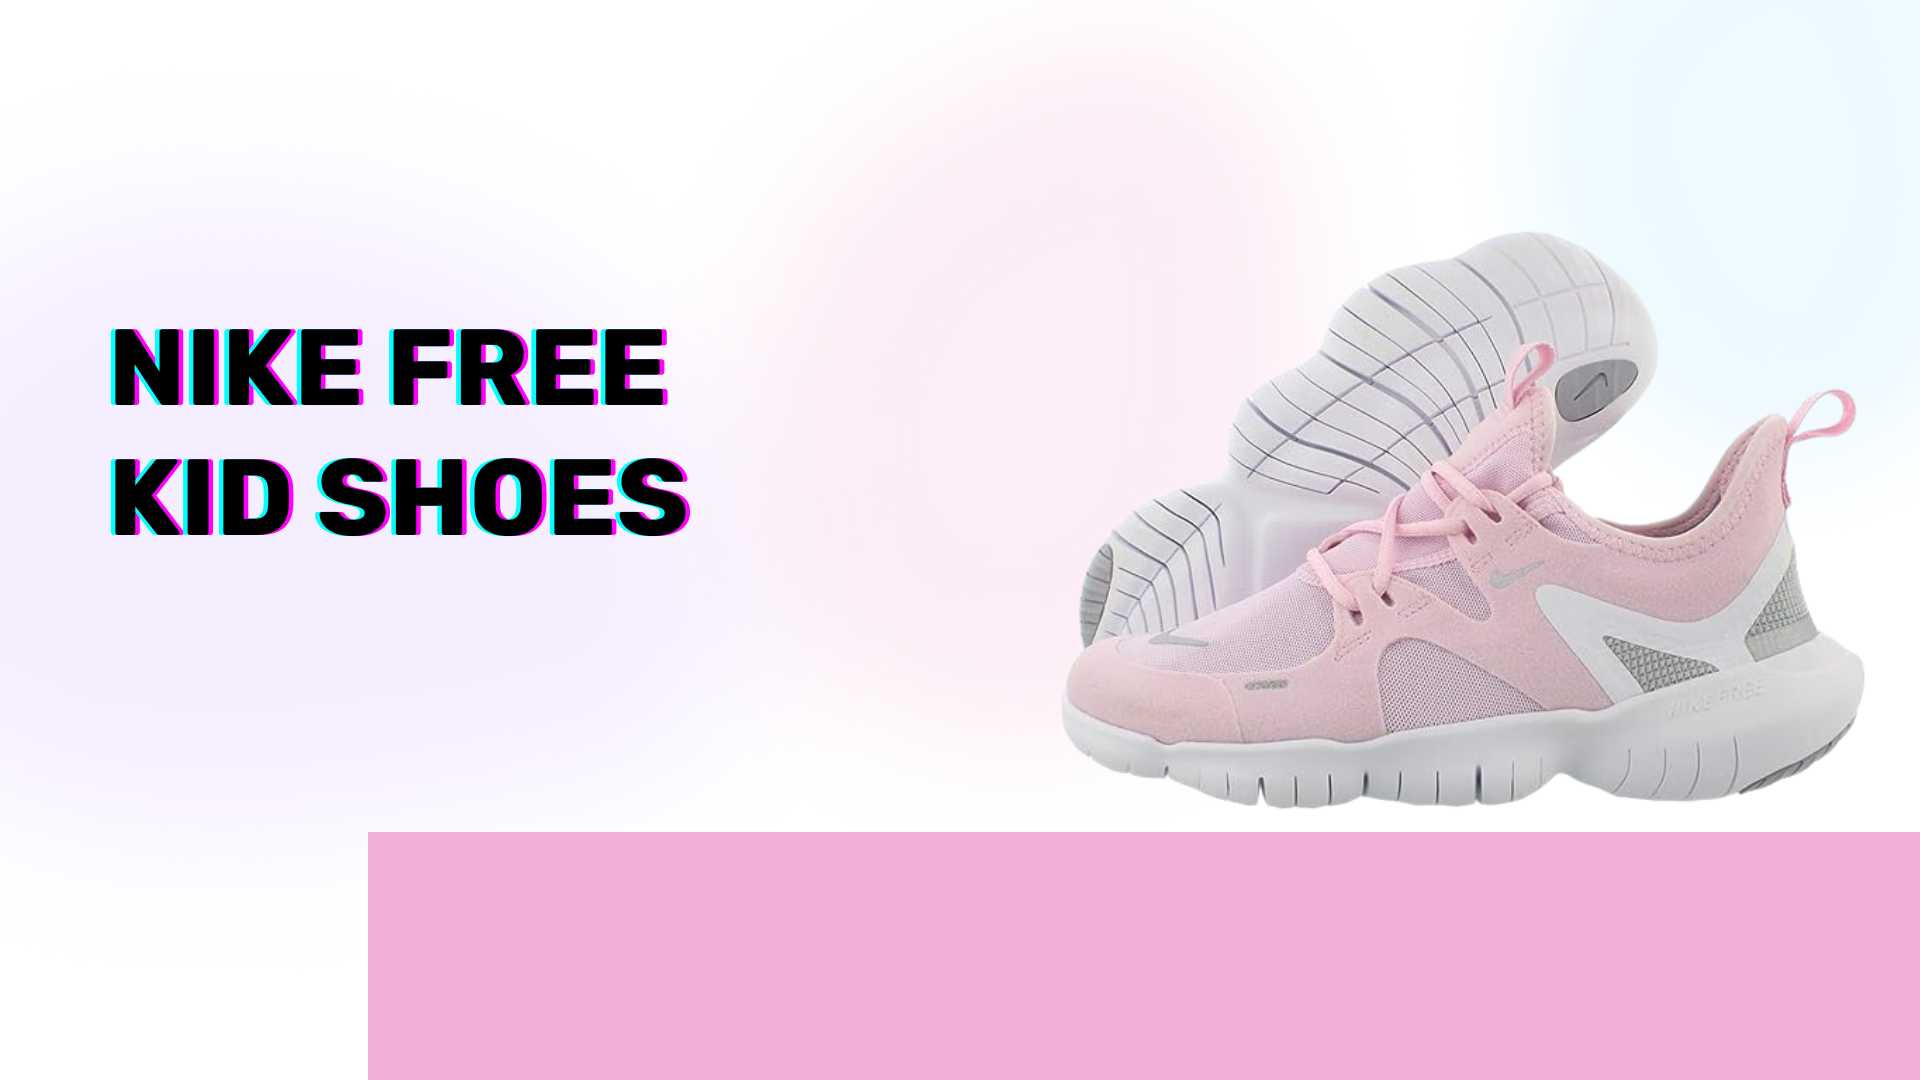 Nike Free Kid Shoes: The Ultimate Guide